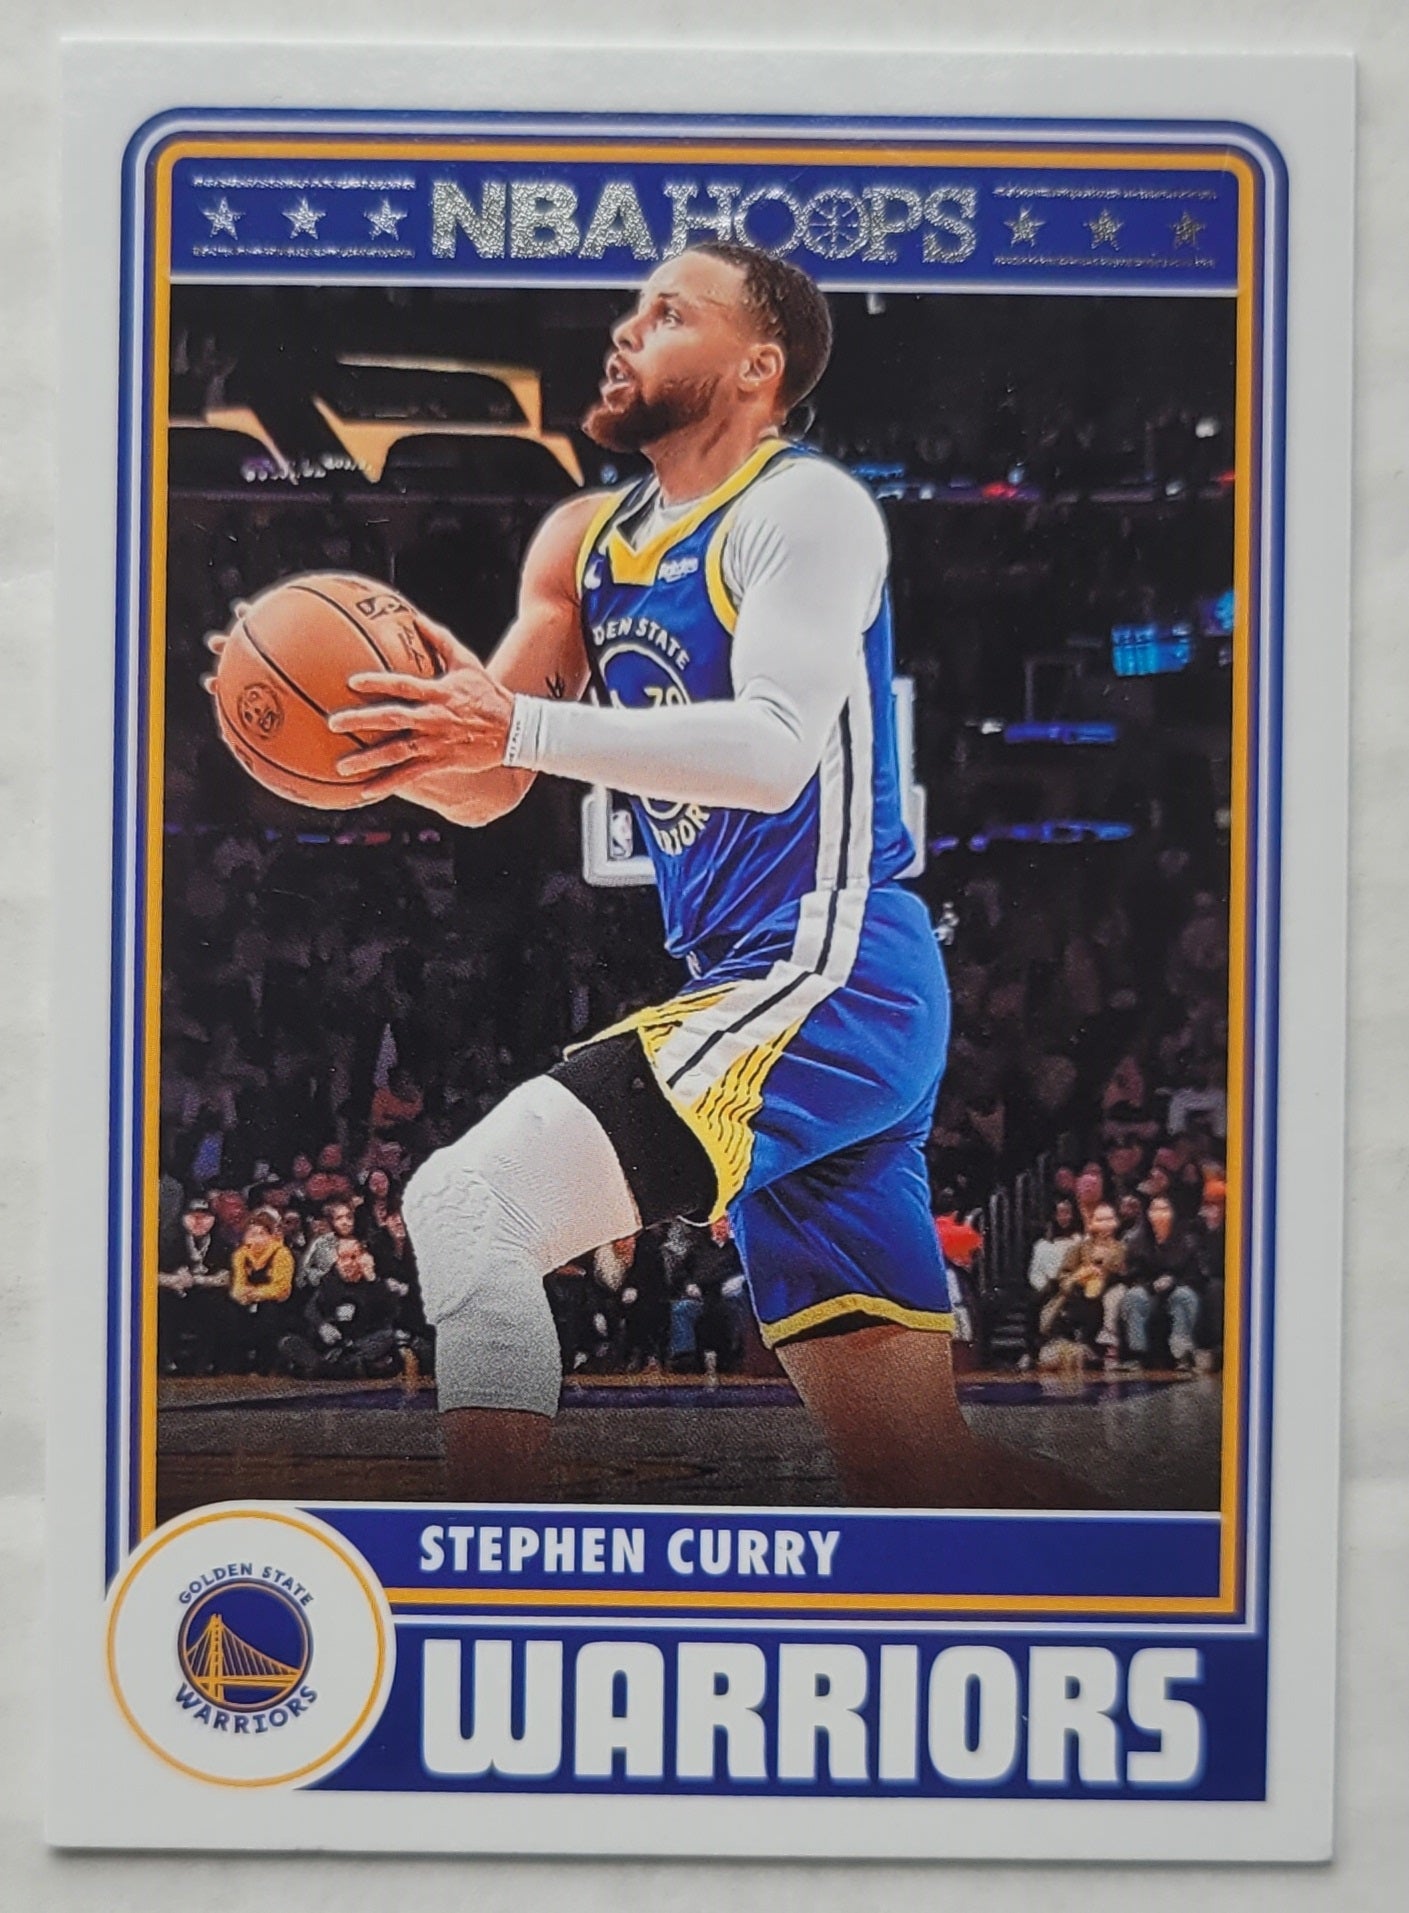 Stephen Curry - 2023-24 Hoops #292